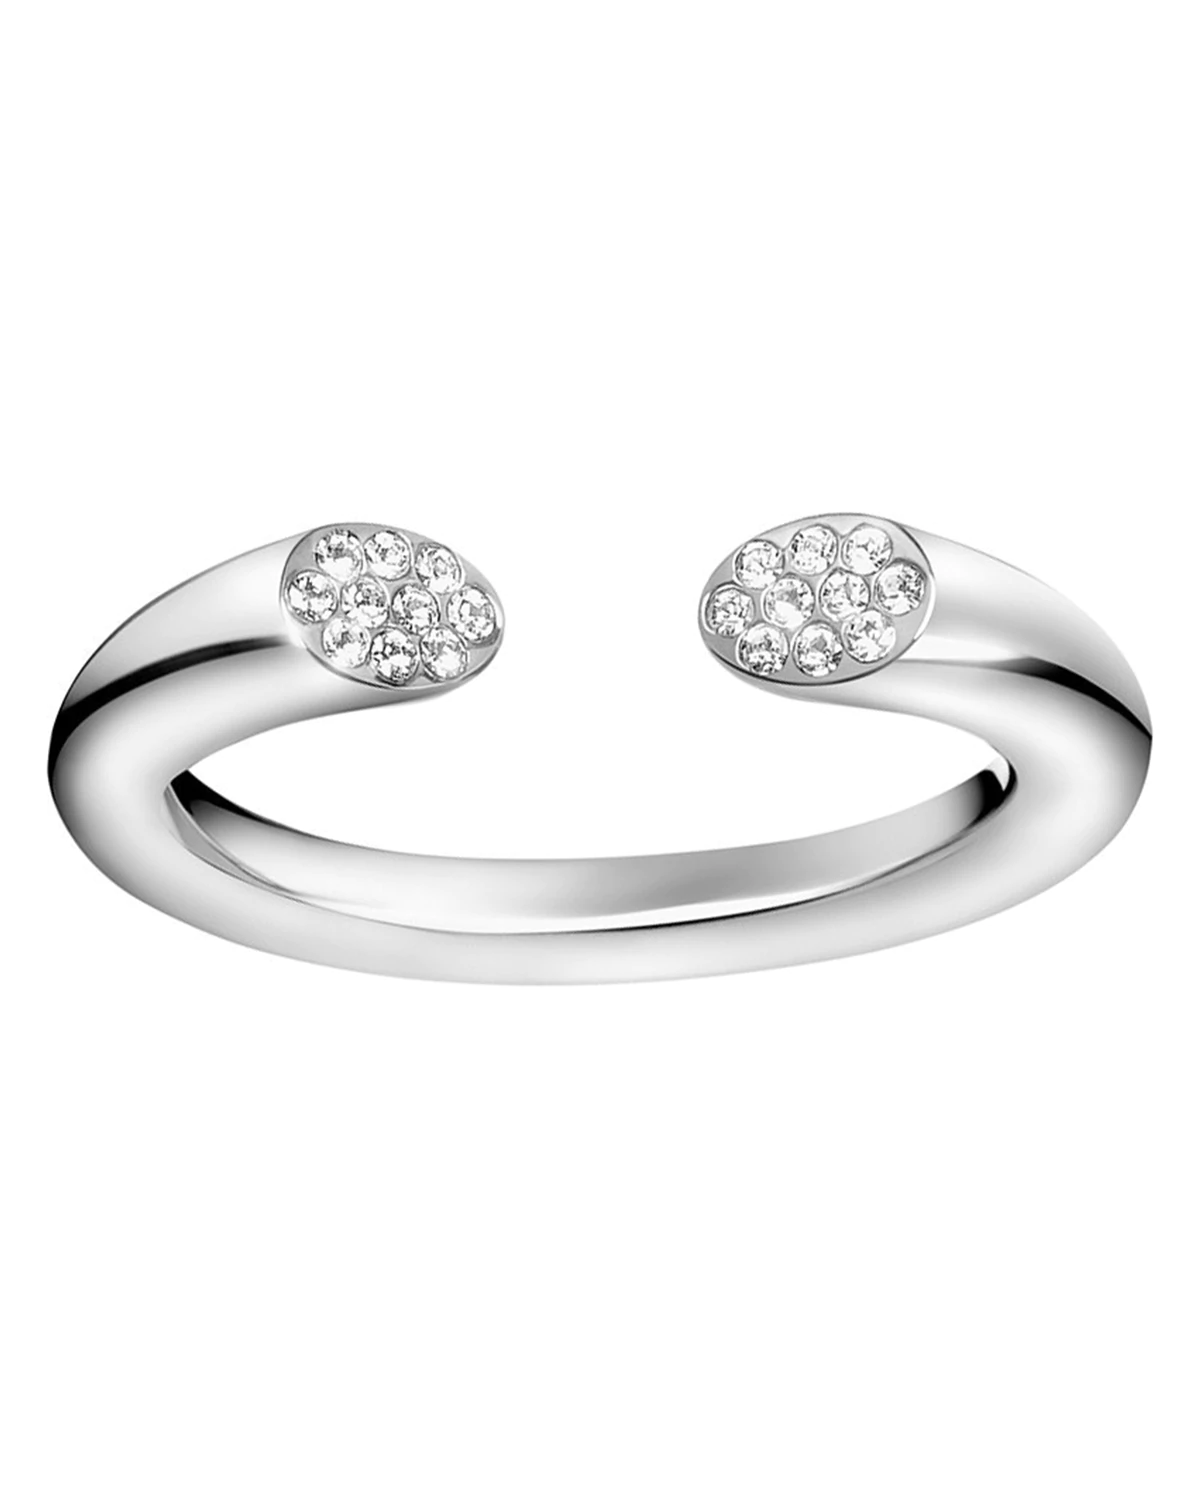 Calvin Klein Stainless Steel Base CZ Set Ends Torq Ring Size N Only  KJ8YMR040107 - David Cullen Jewellers % %